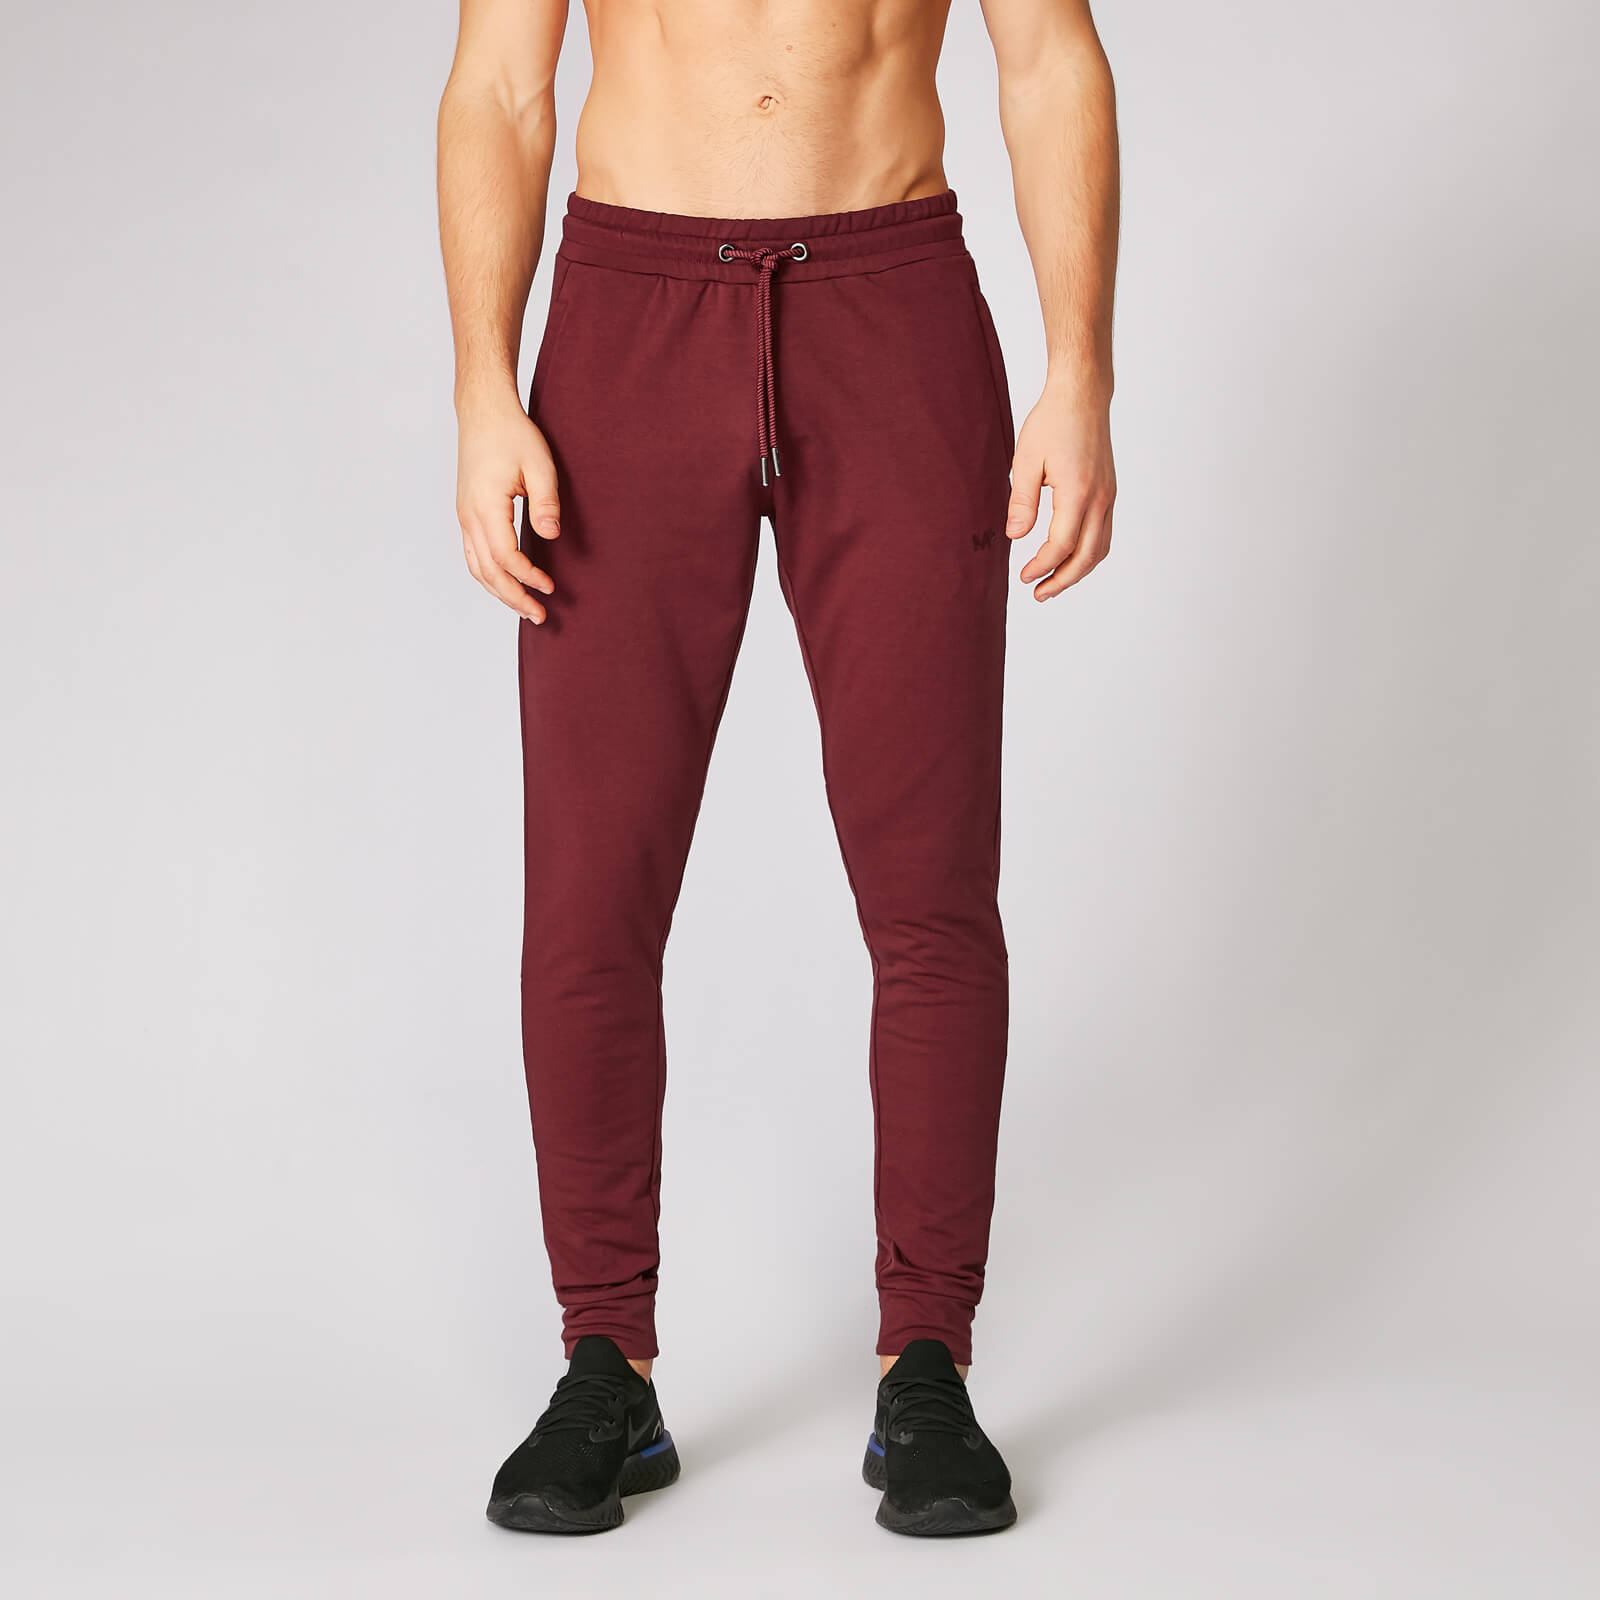 Myprotein Form Slim Fit Joggers - Oxblood - XS